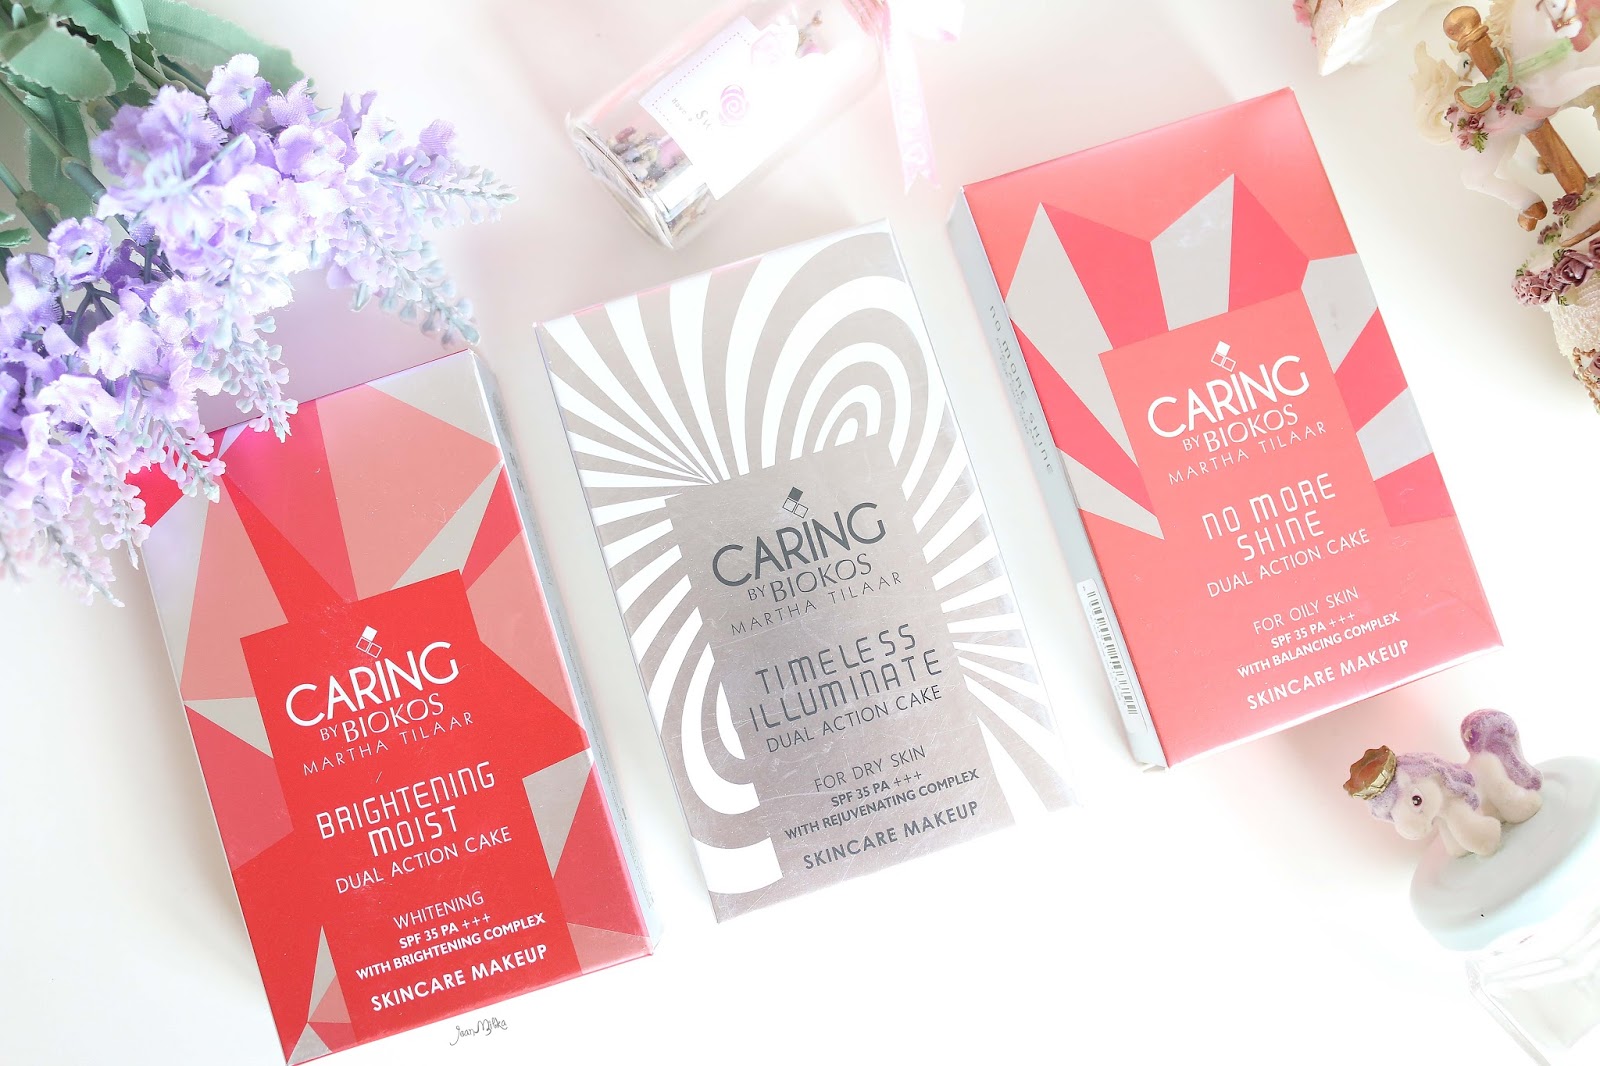 caring, caring by biokos, review, two way cake, caring two way cake, dual action cake, drugstore, makeup, makeup indonesia, makeup murah, beautywithoutworry, brightening moist, no more shine, timeless illuminate